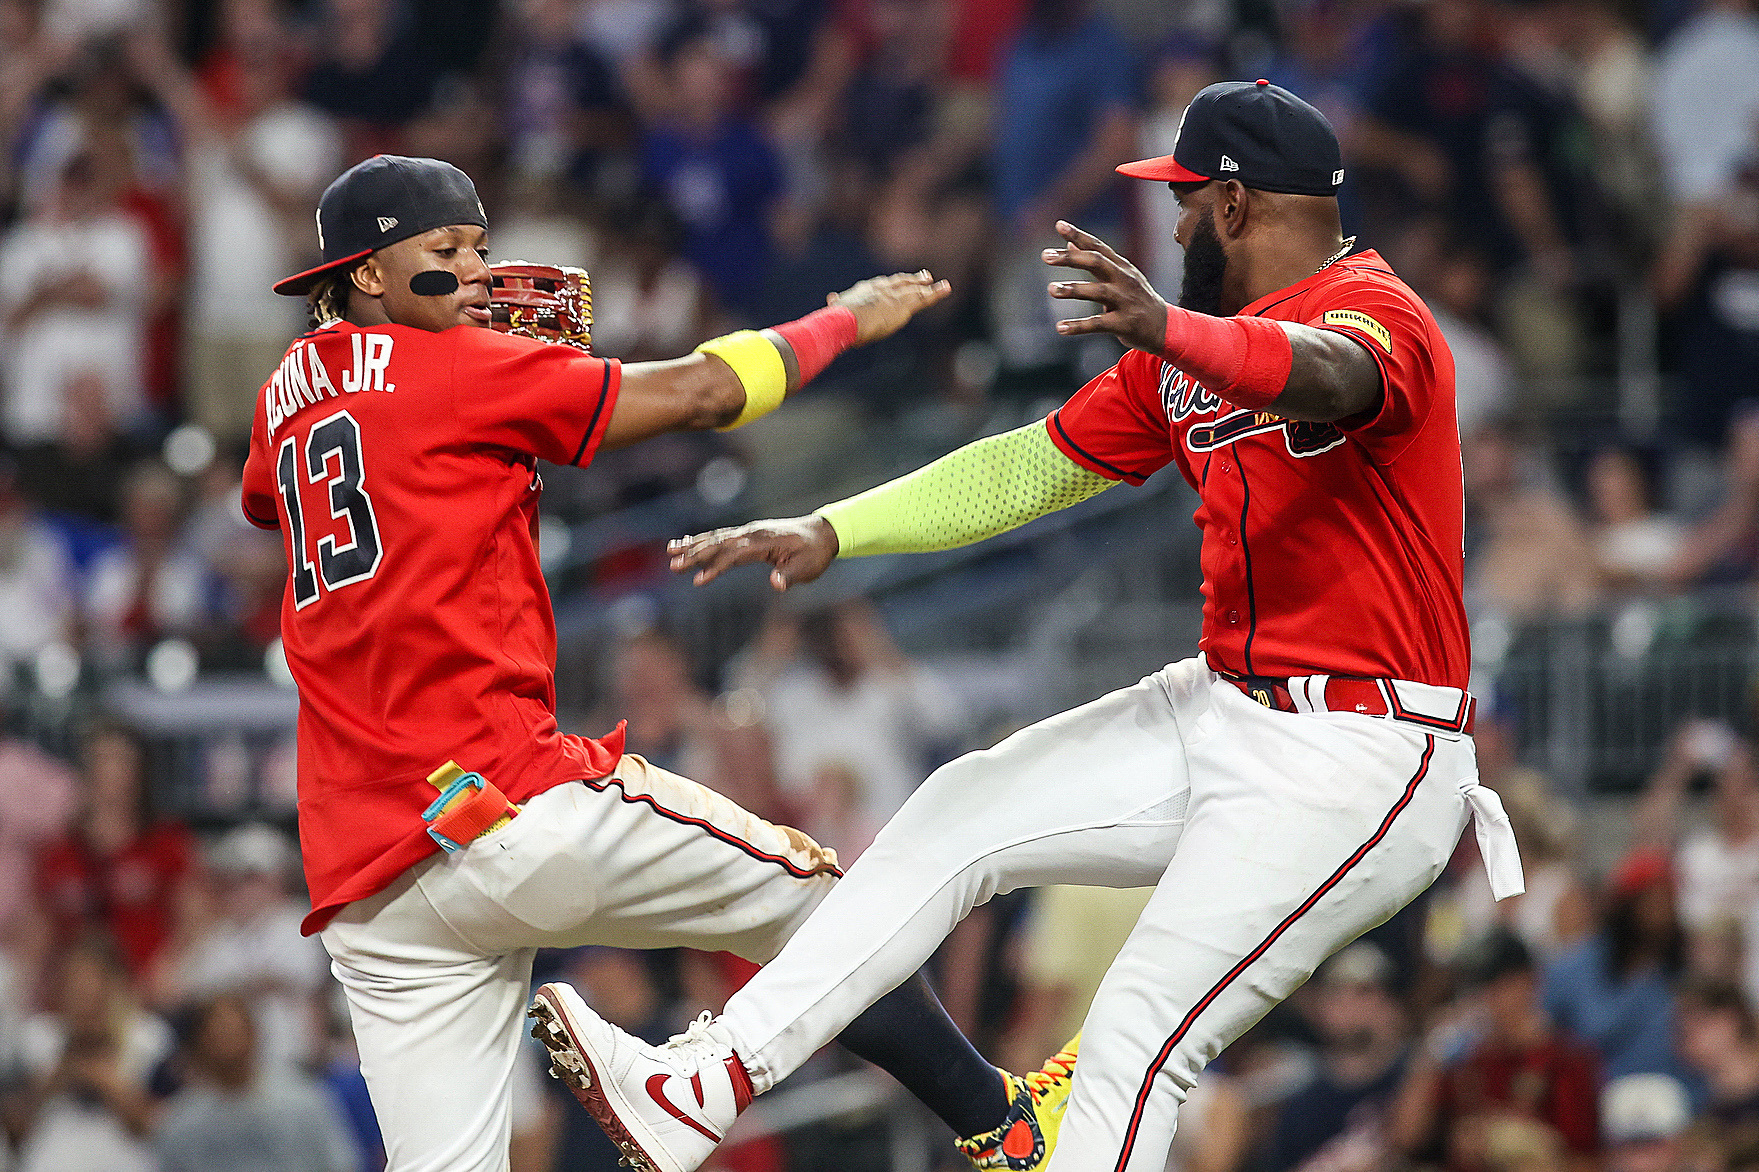 Braves stay hot to start second half, dominate White Sox 9-0